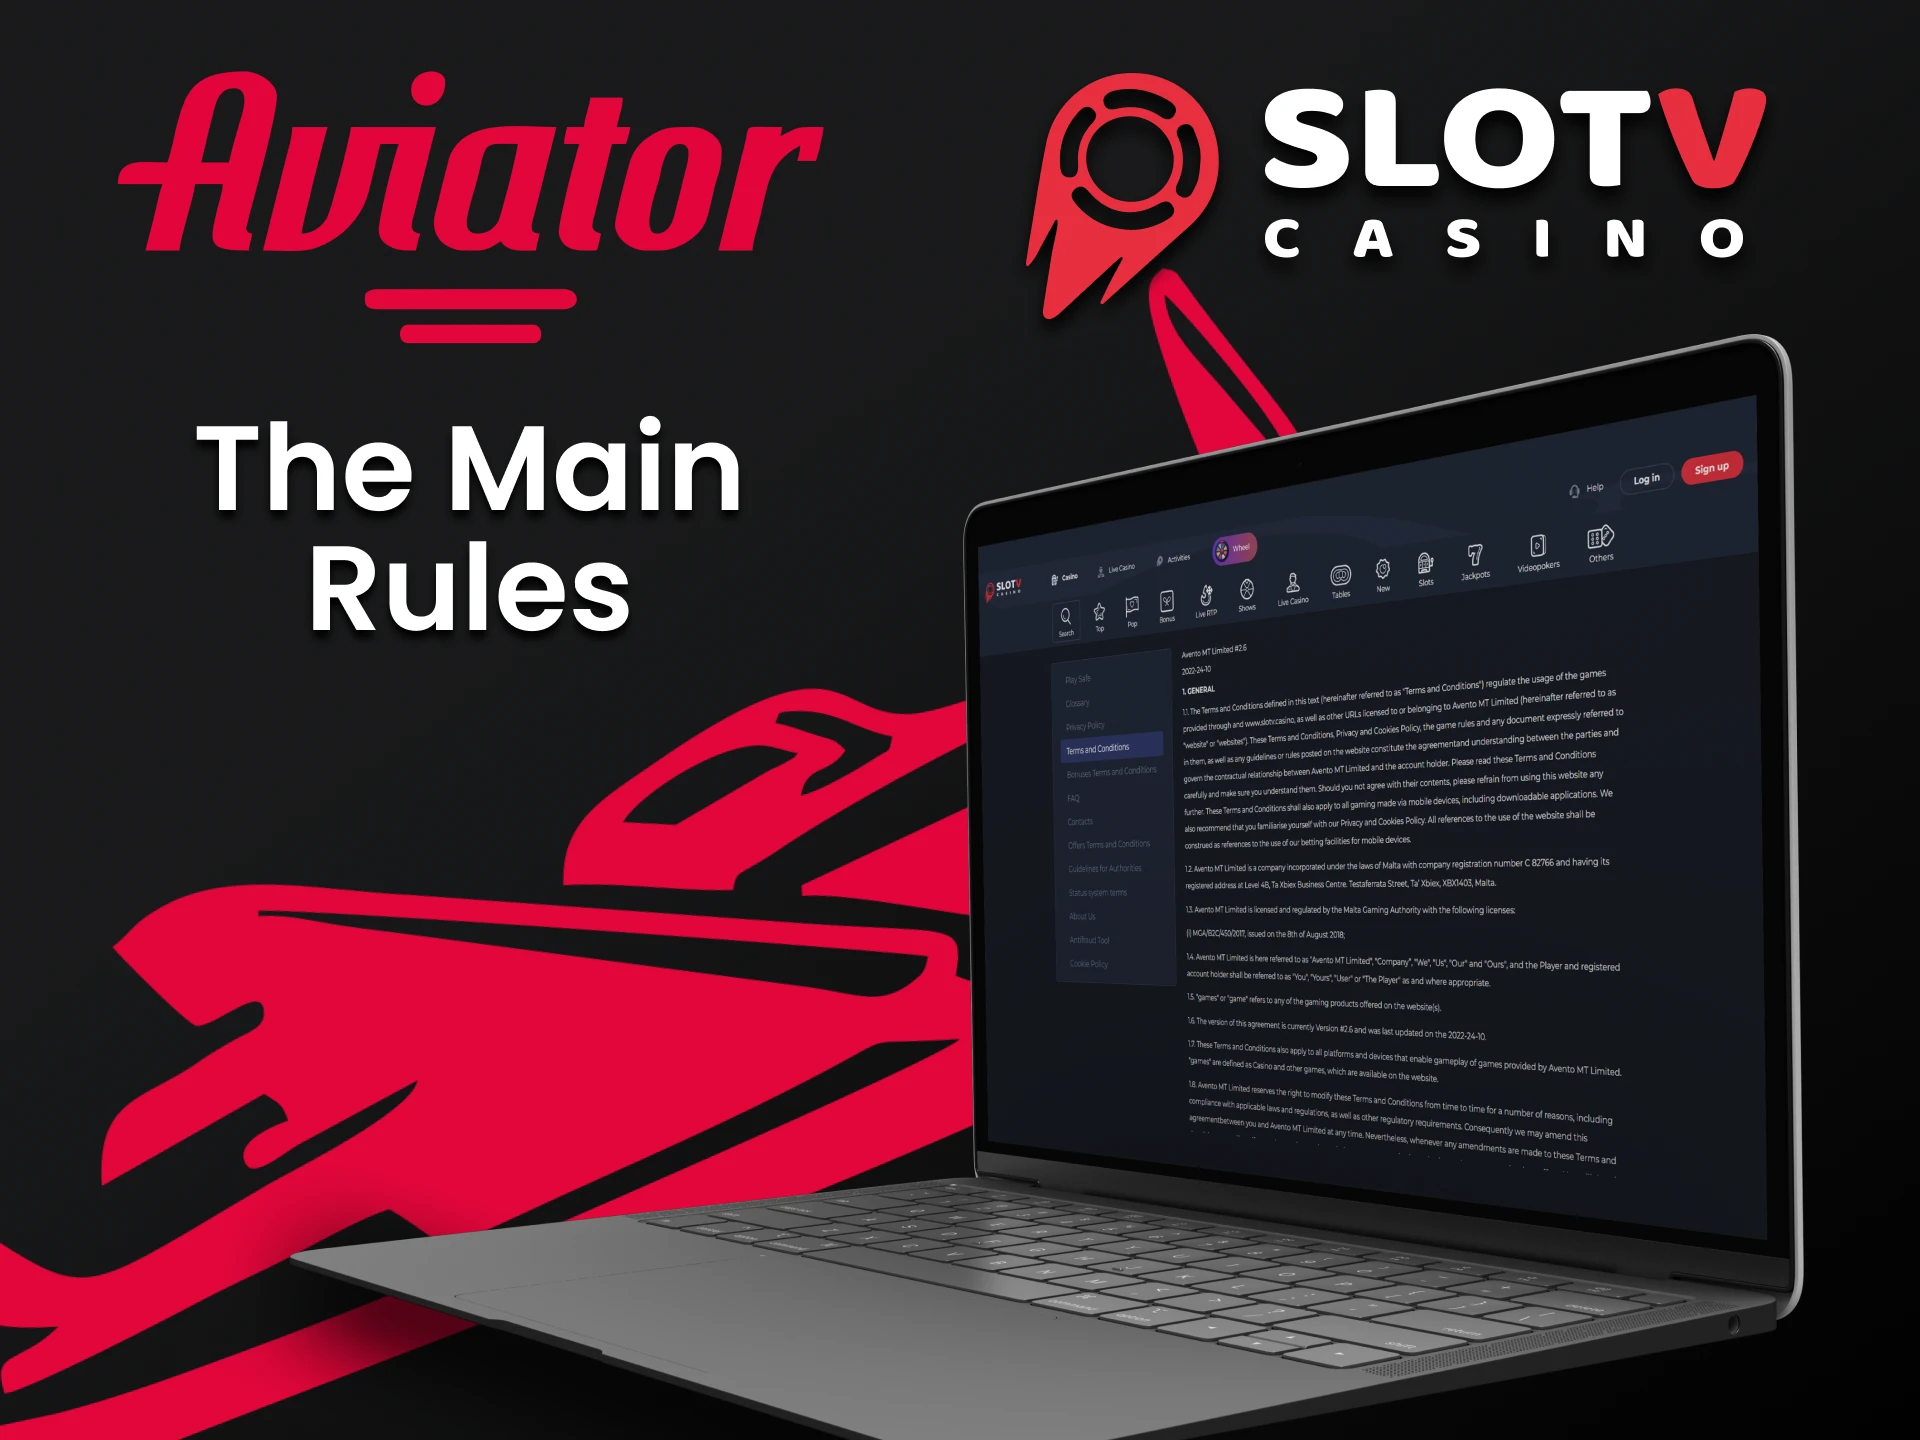 Learn the rules of the SlotV service for playing Aviator.